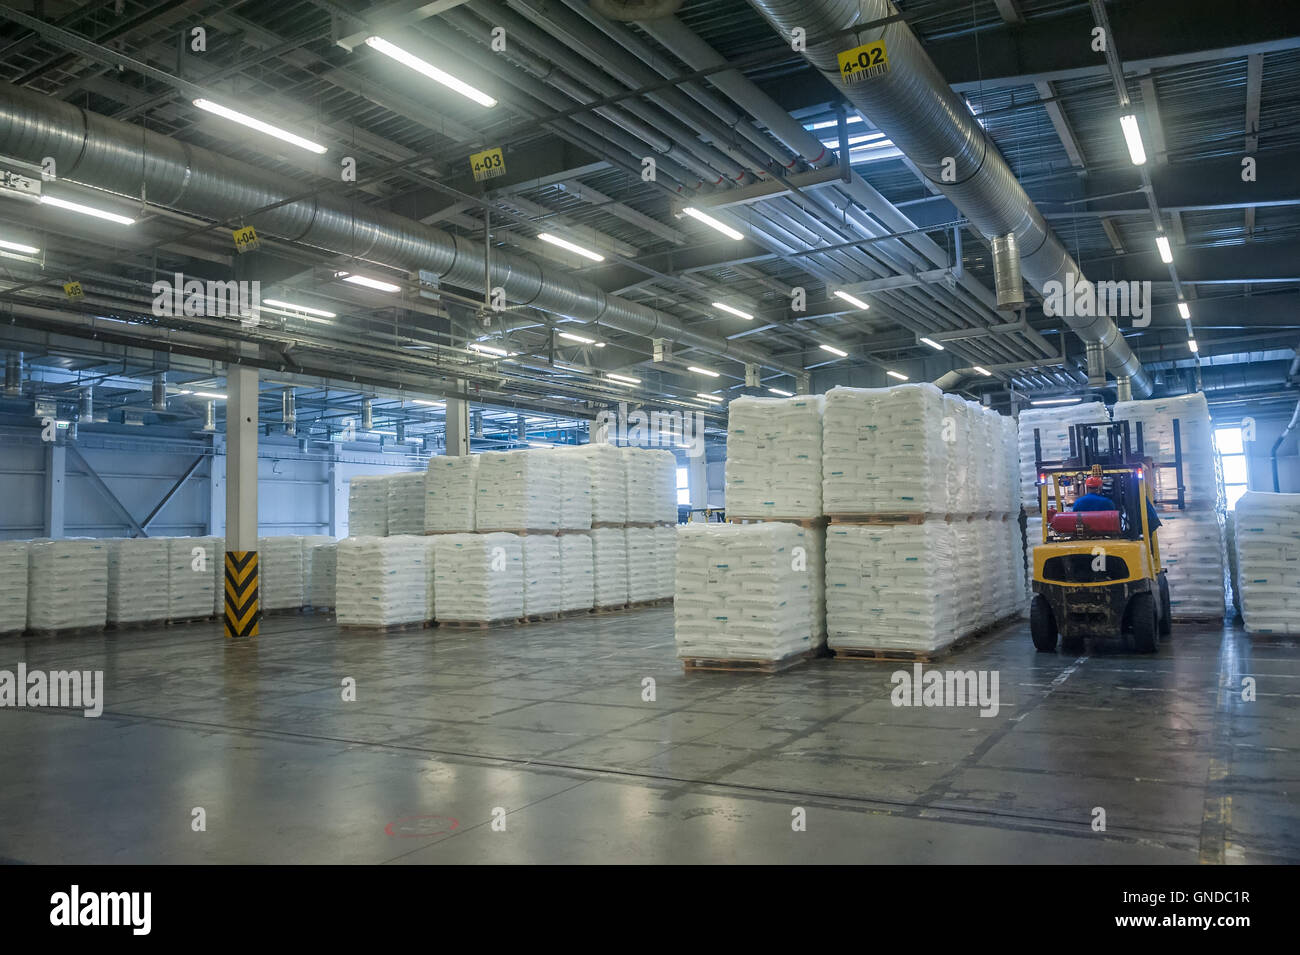 Forklift truck loads pallets with finished goods Stock Photo